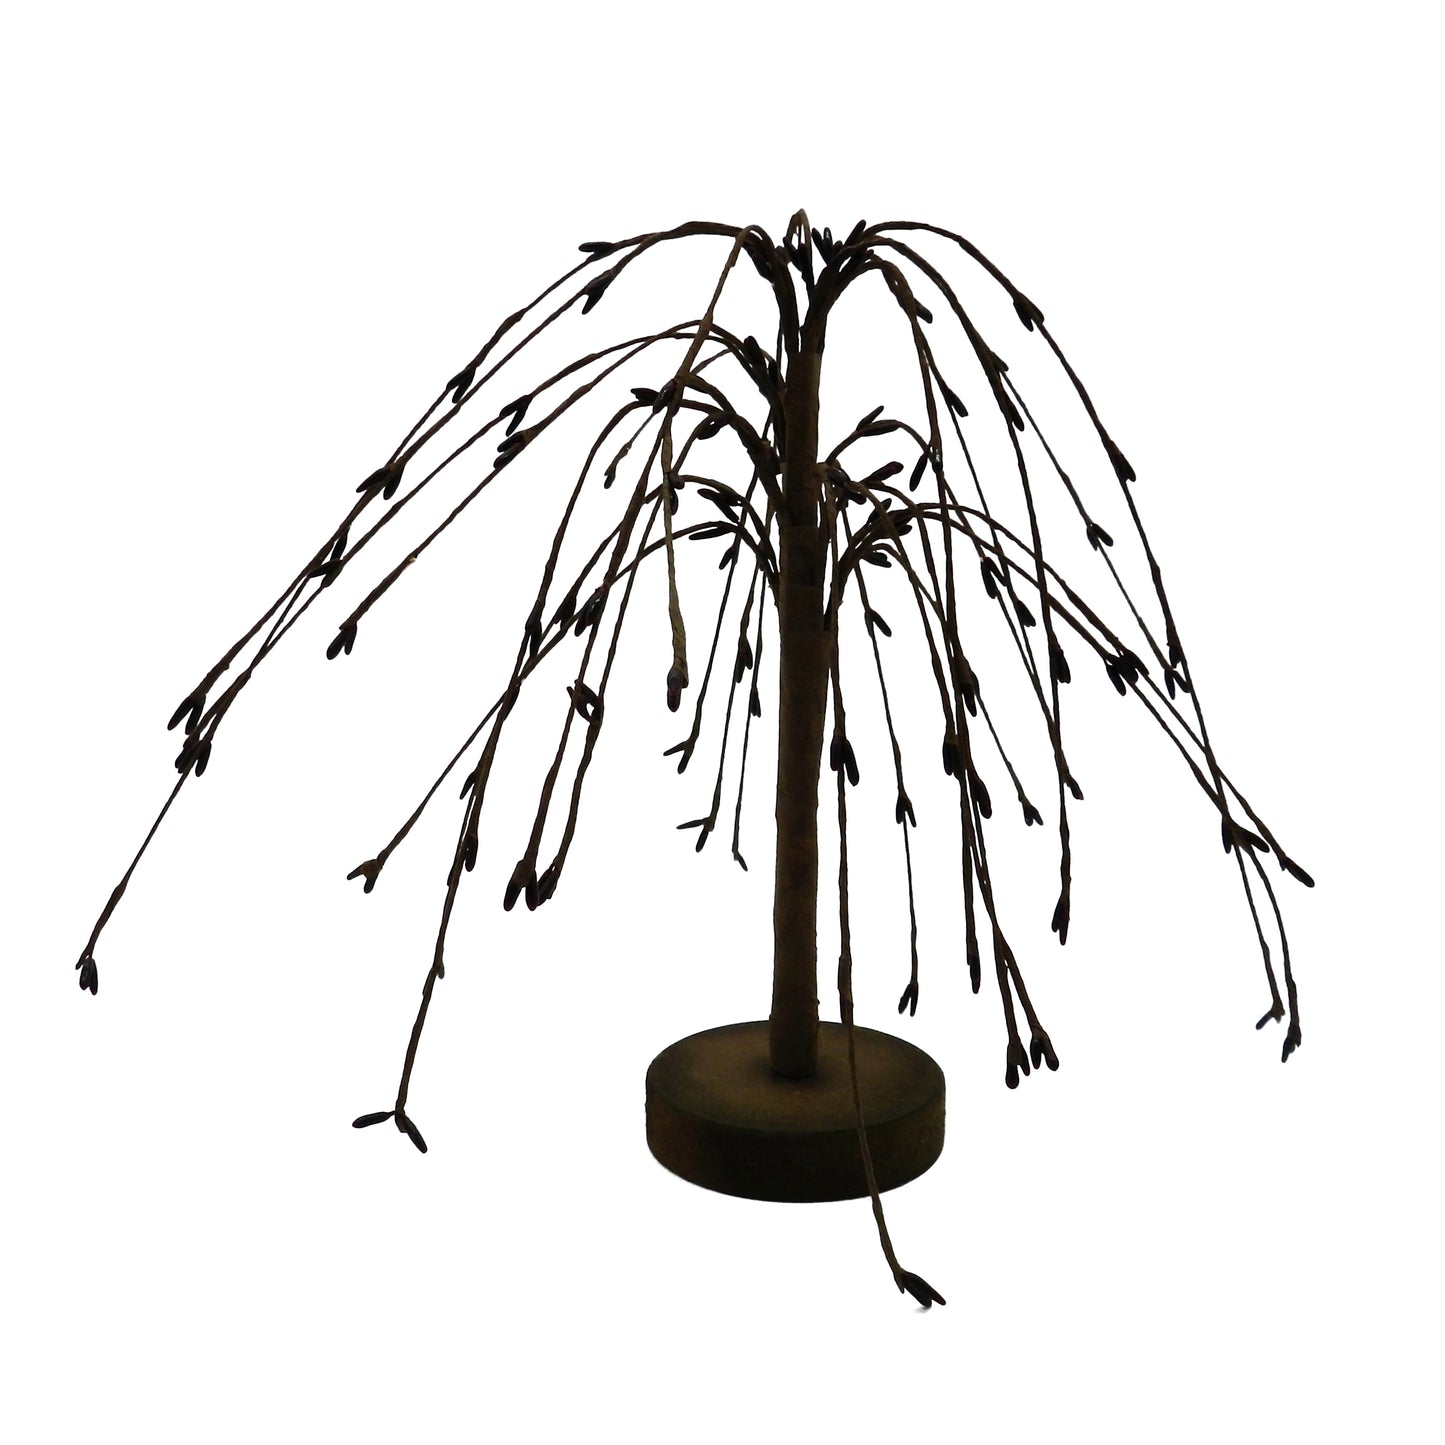 CVHOMEDECO. Burgundy Pip Berry Weeping Willow Tree Country Vintage Decoration Art, 7 Inch